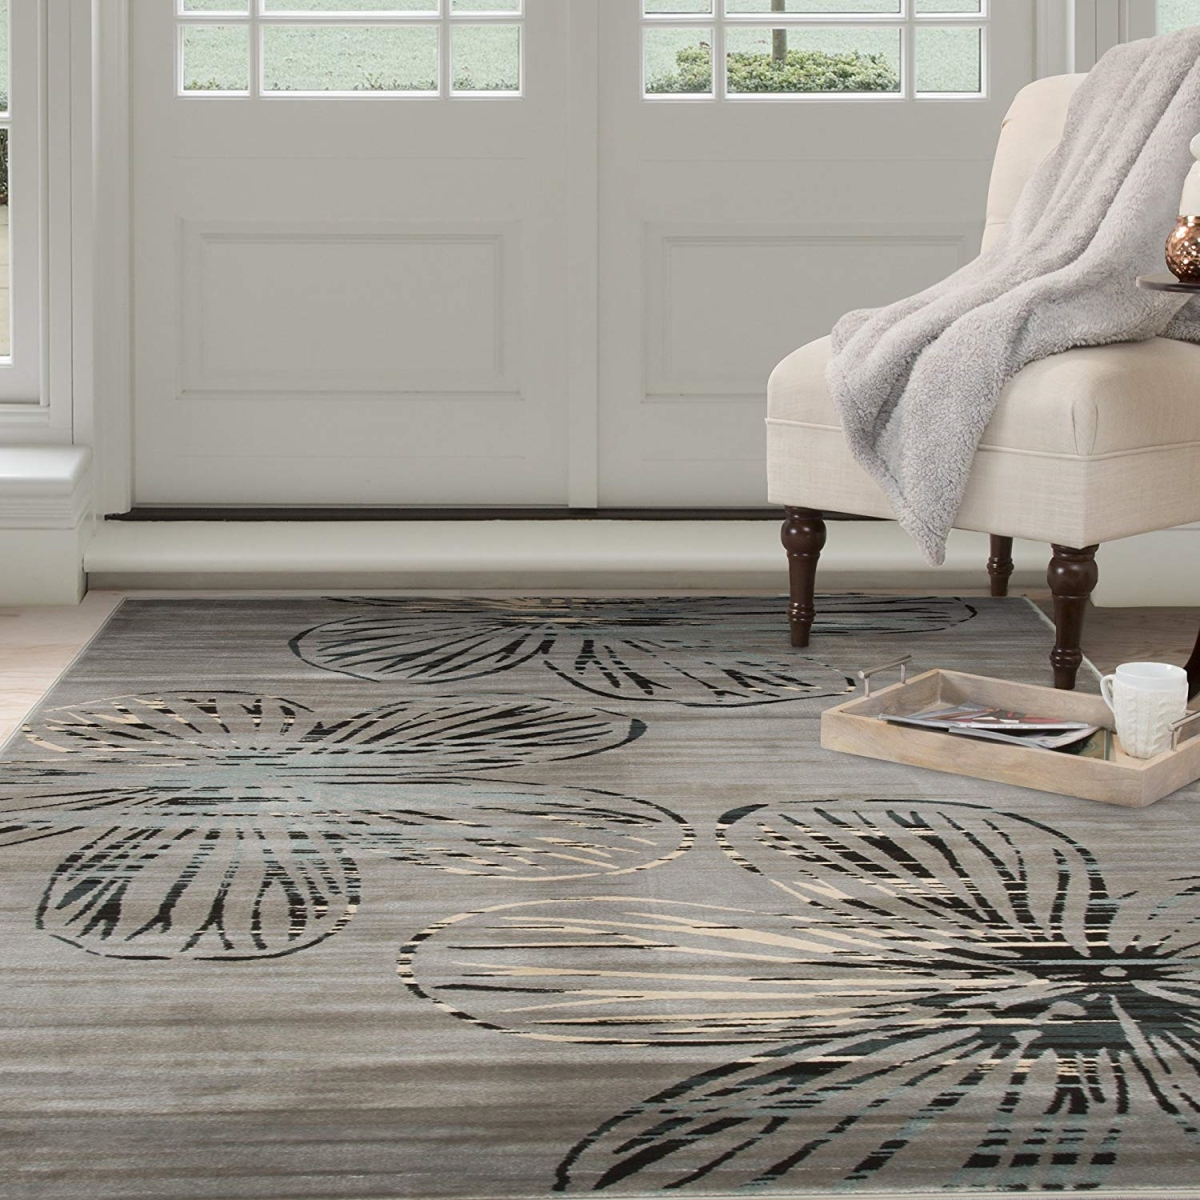 62a-26752 Opus Modern Floral Area Rug, 5 Ft. 3 In. X 7 Ft. 7 In. - Grey